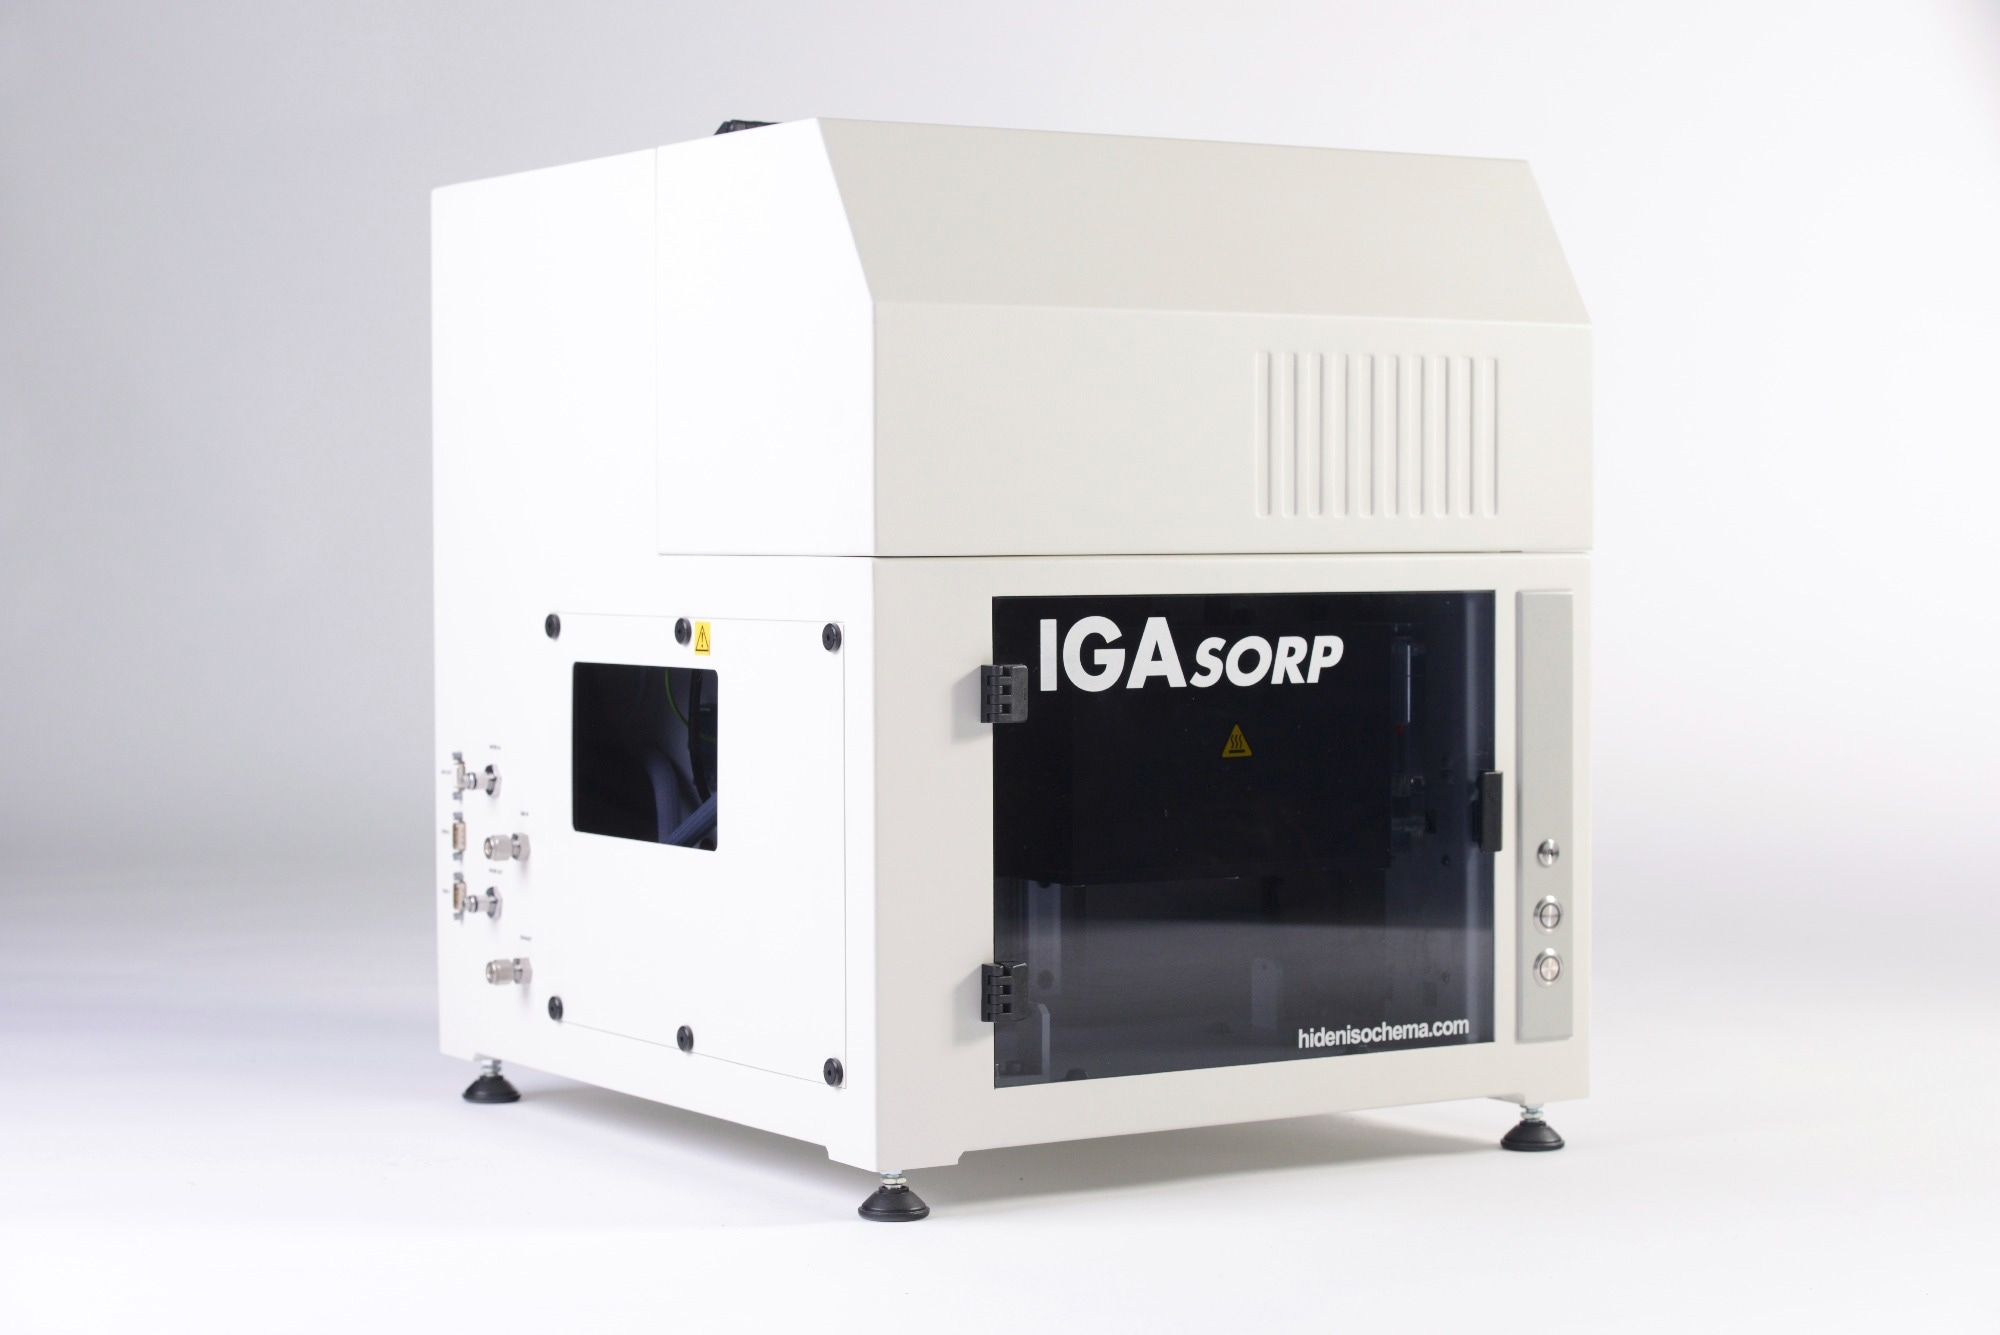 Fast and accurate vapor sorption measurements using the IGAsorp